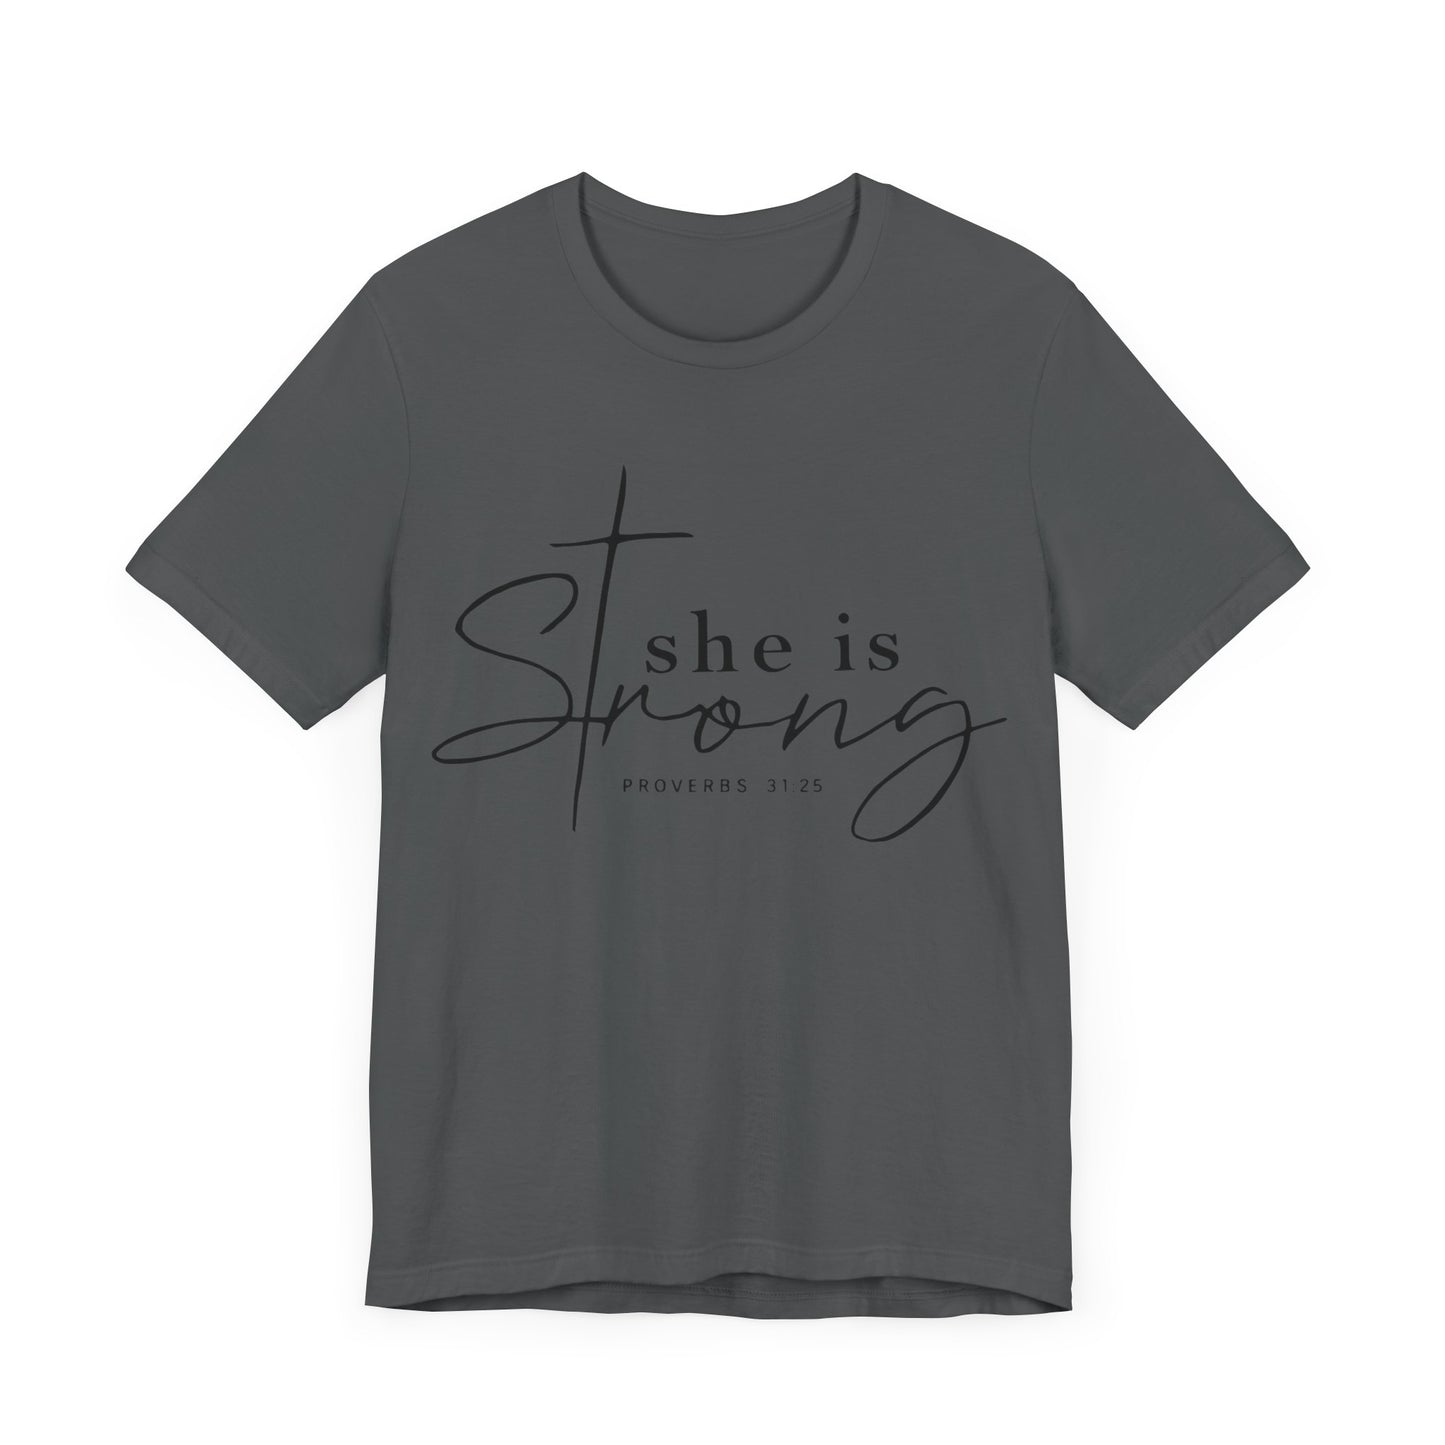 She is Strong - Proverbs 31:25: T-Shirt